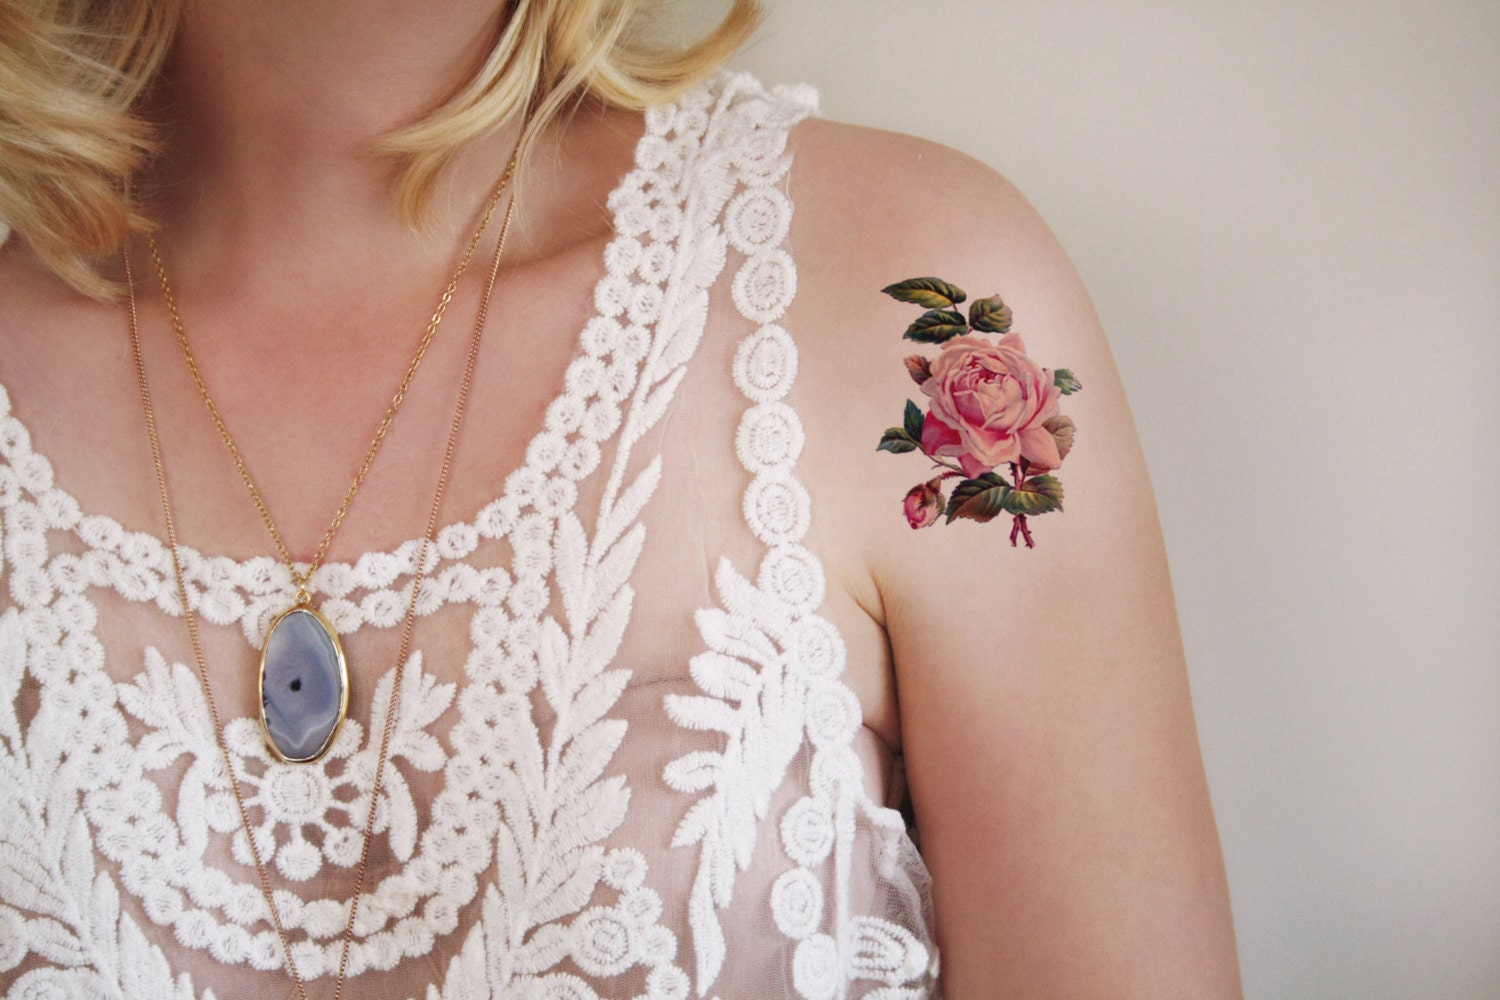 Small rose temporary tattoo / small temporary tattoo / floral